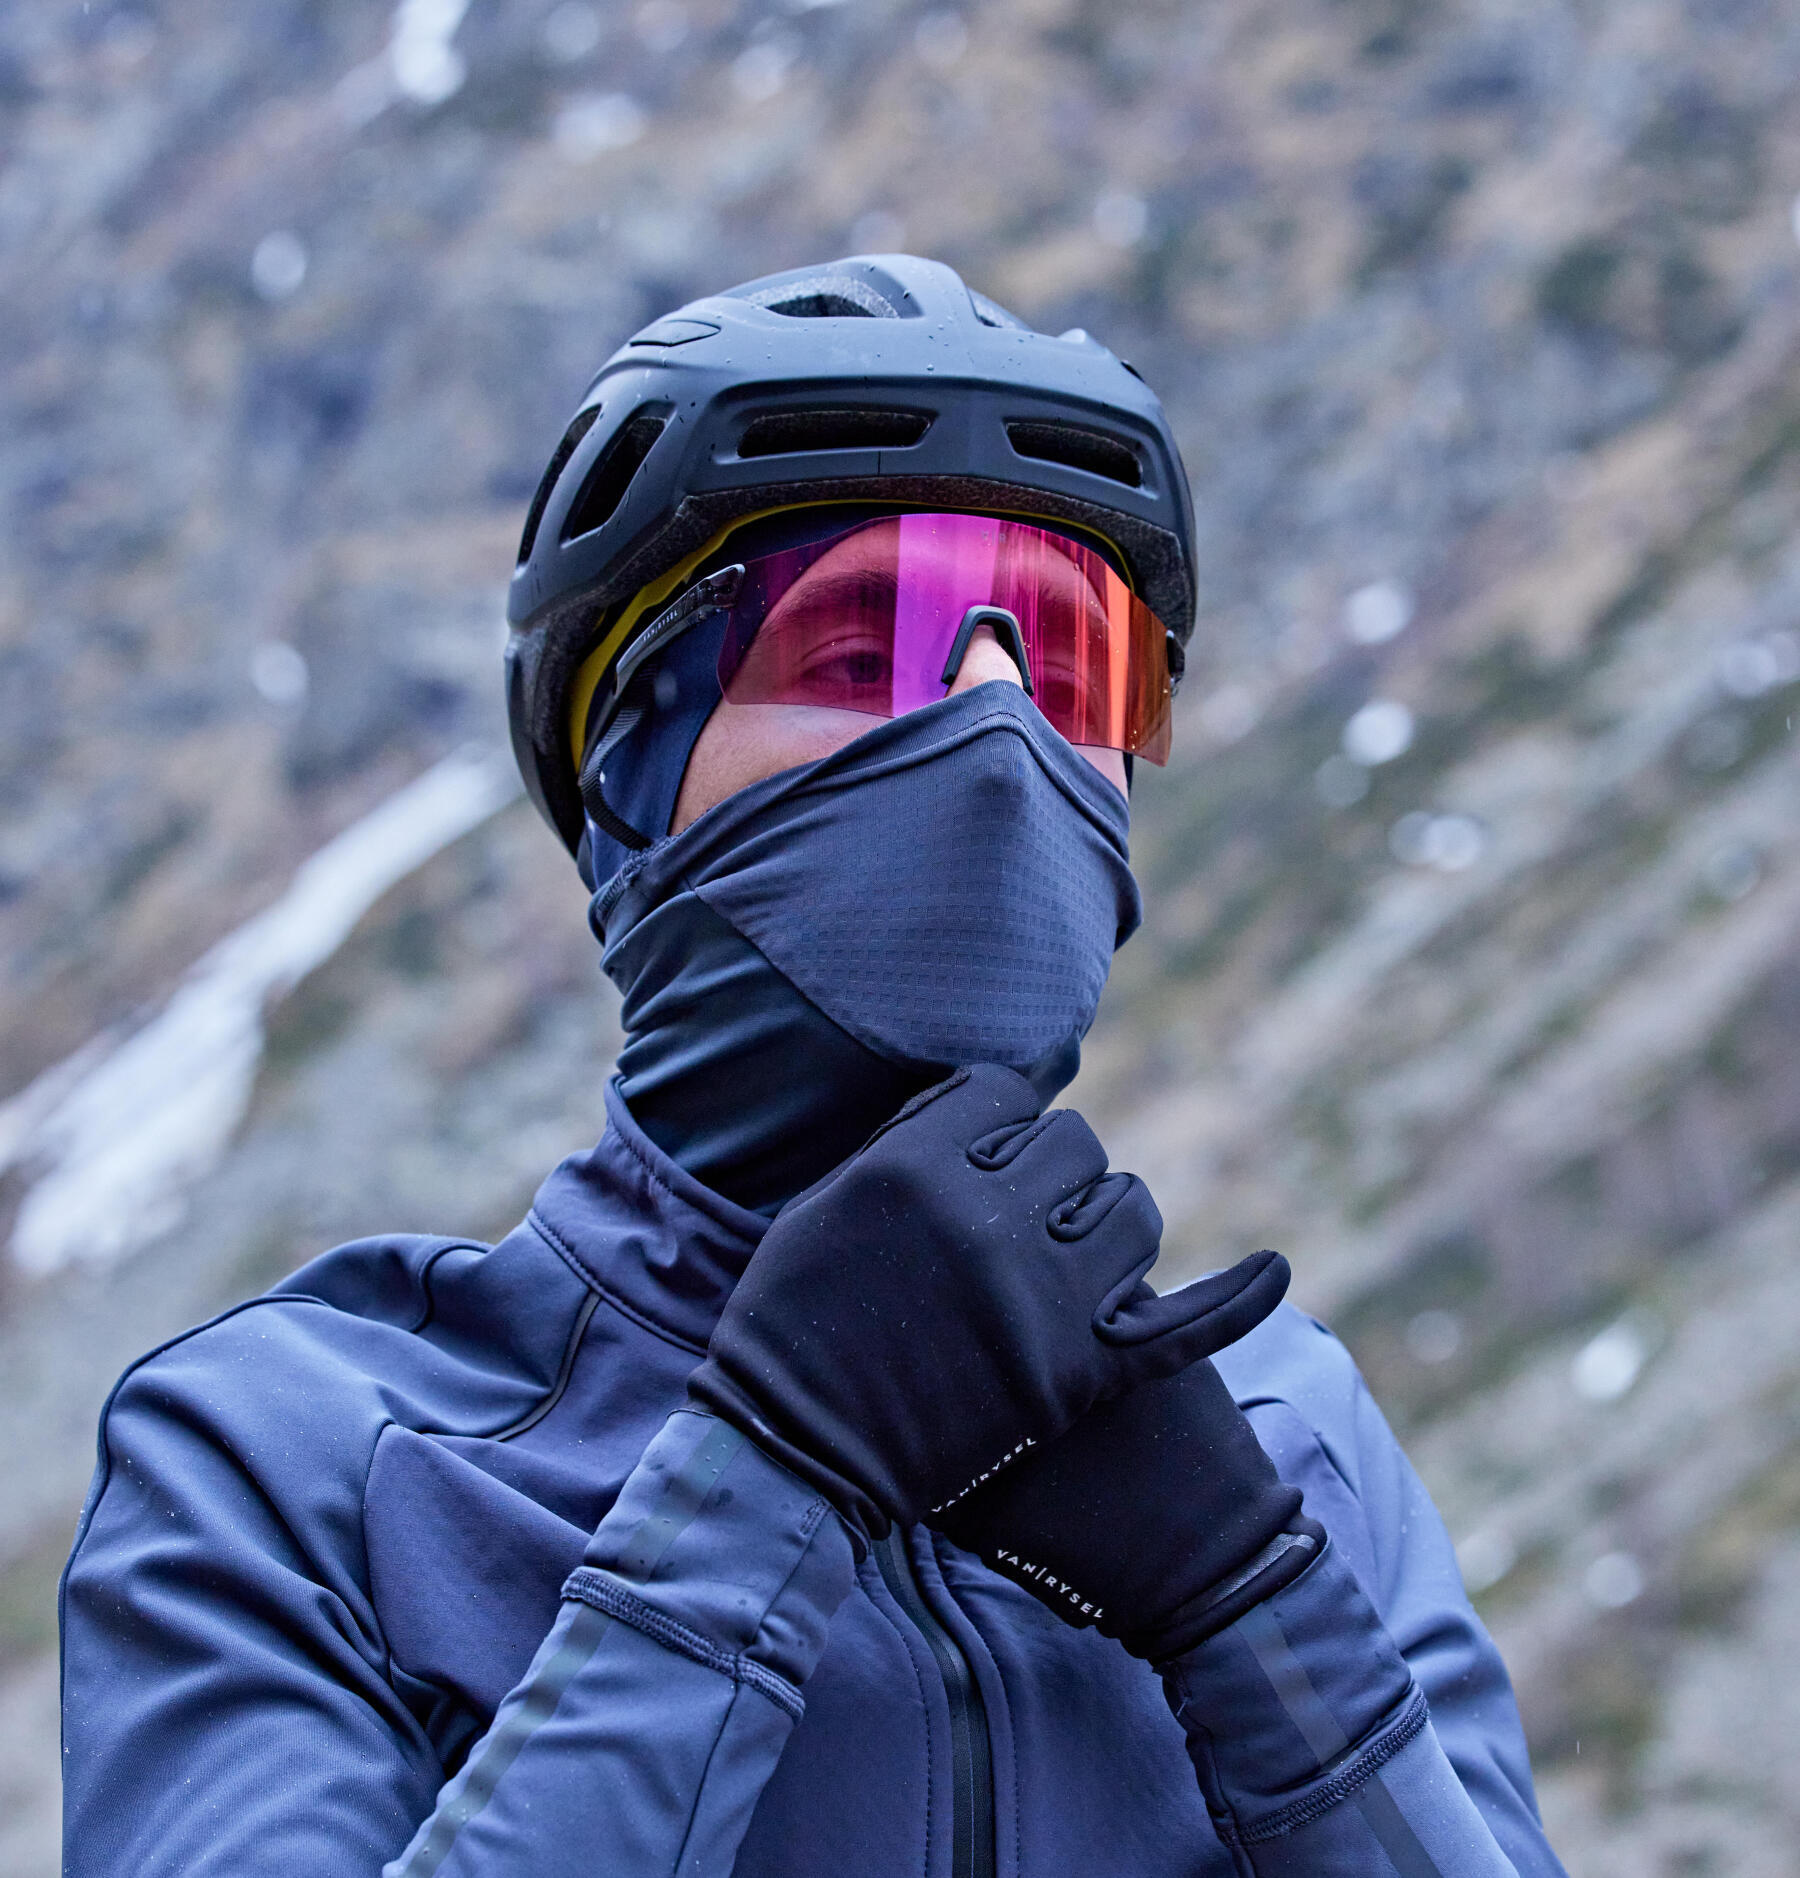 Cycling in winter: tips from a pro